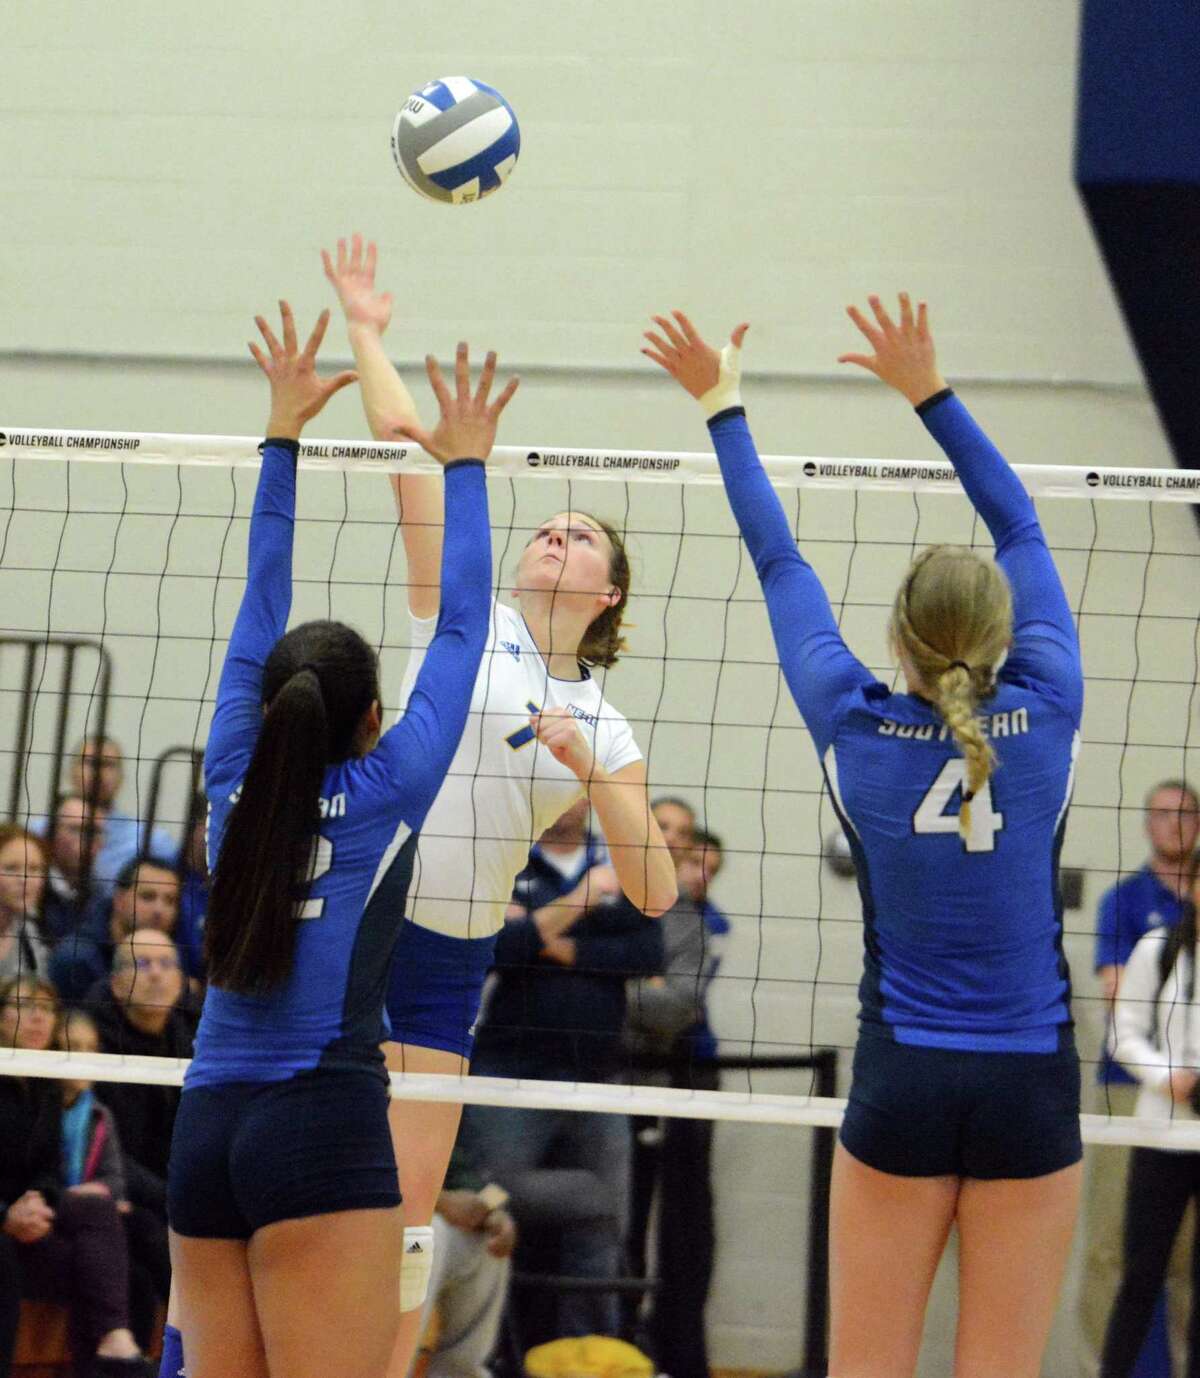 New Haven's Mallory Nowicki hits the ball as SCSU's Leanna Jadus, left, and Alyssa Gage defend on Friday.